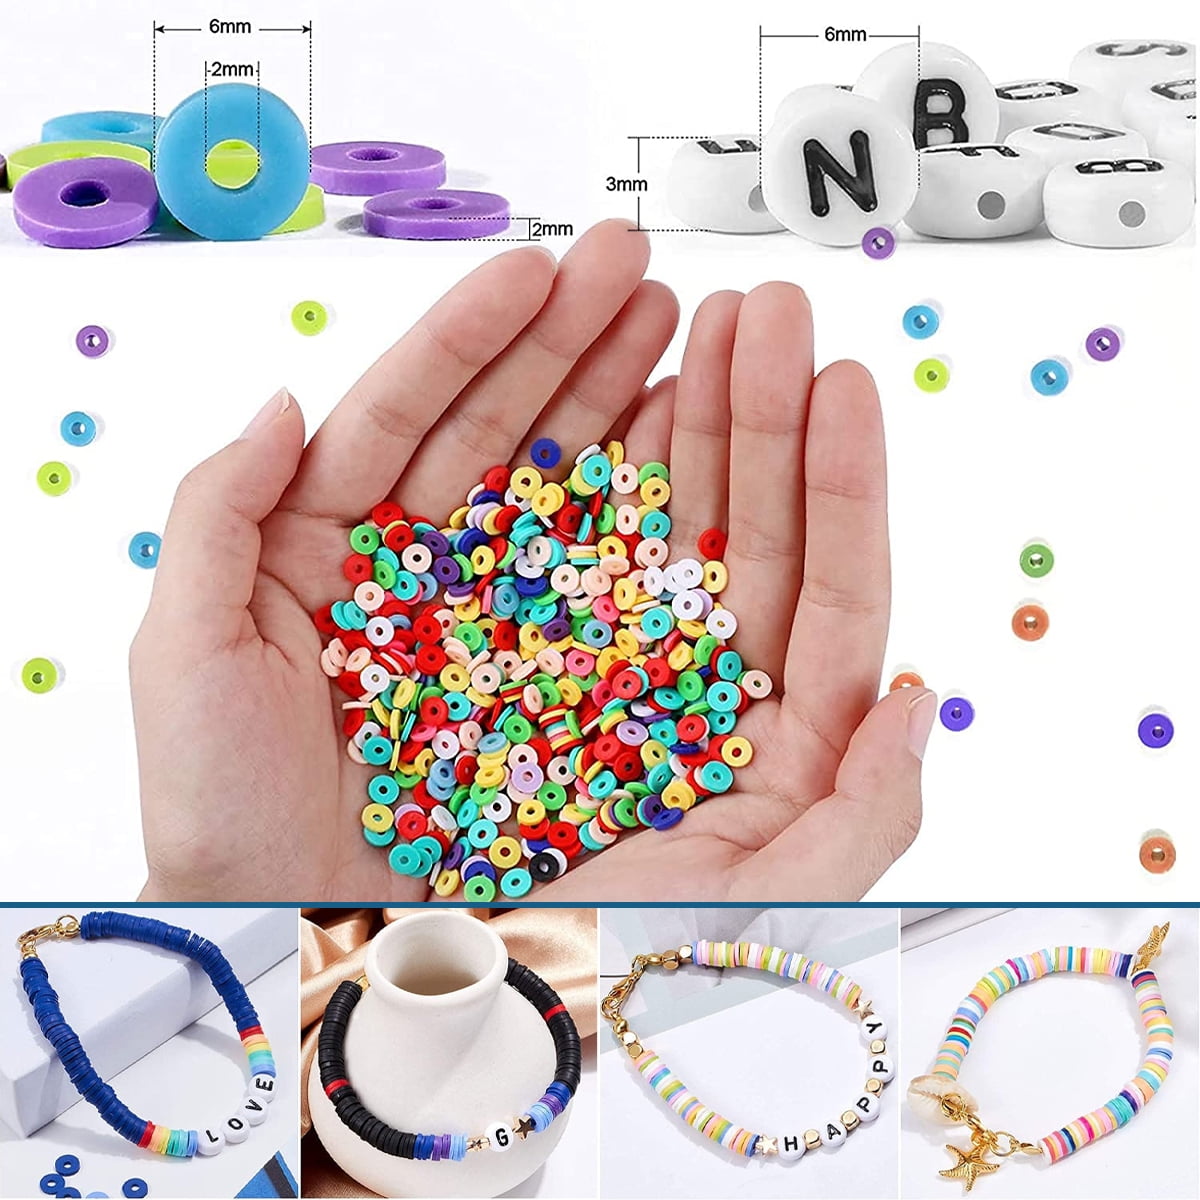  Wergund 6000 pcs Clay Beads for Bracelets Making Kit, 915  Letter Beads, 24 Color 6mm Flat Clay Beads, Jump Rings and Elastic String  Pendant - for DIY Jewelry Making Bracelets Necklace